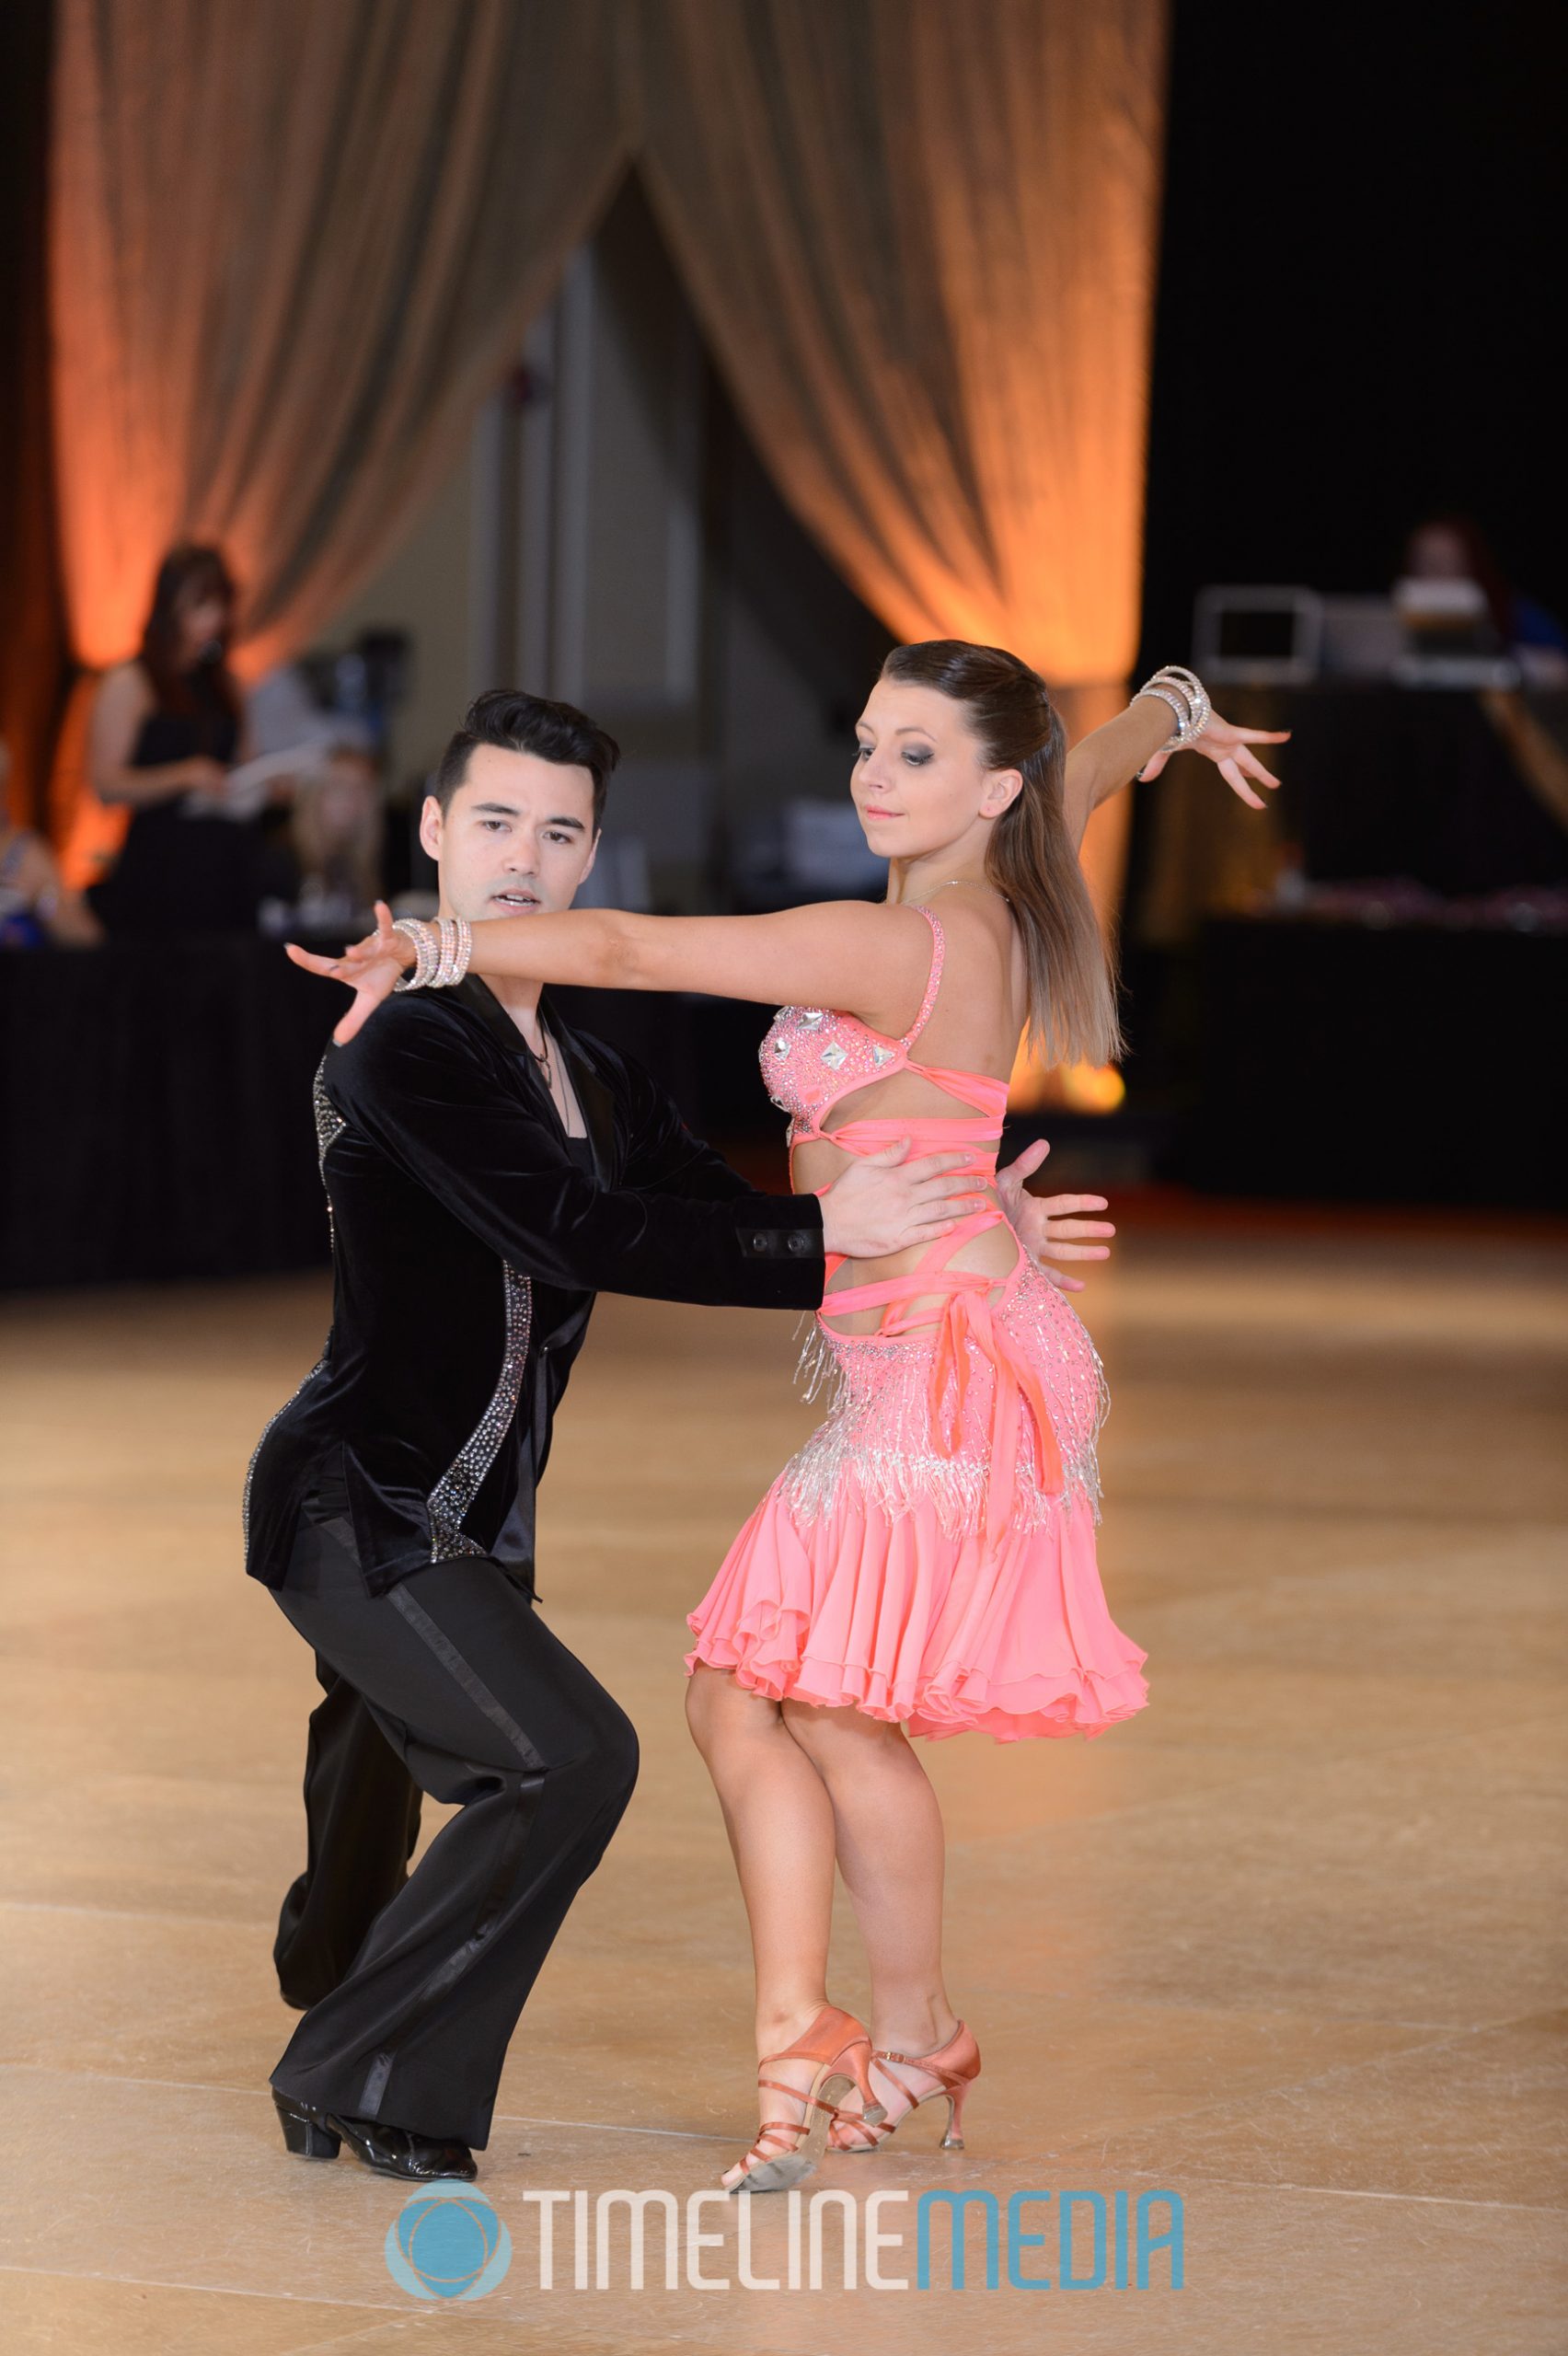 Dancers competing in Maryland dancing competition ©TimeLine Media